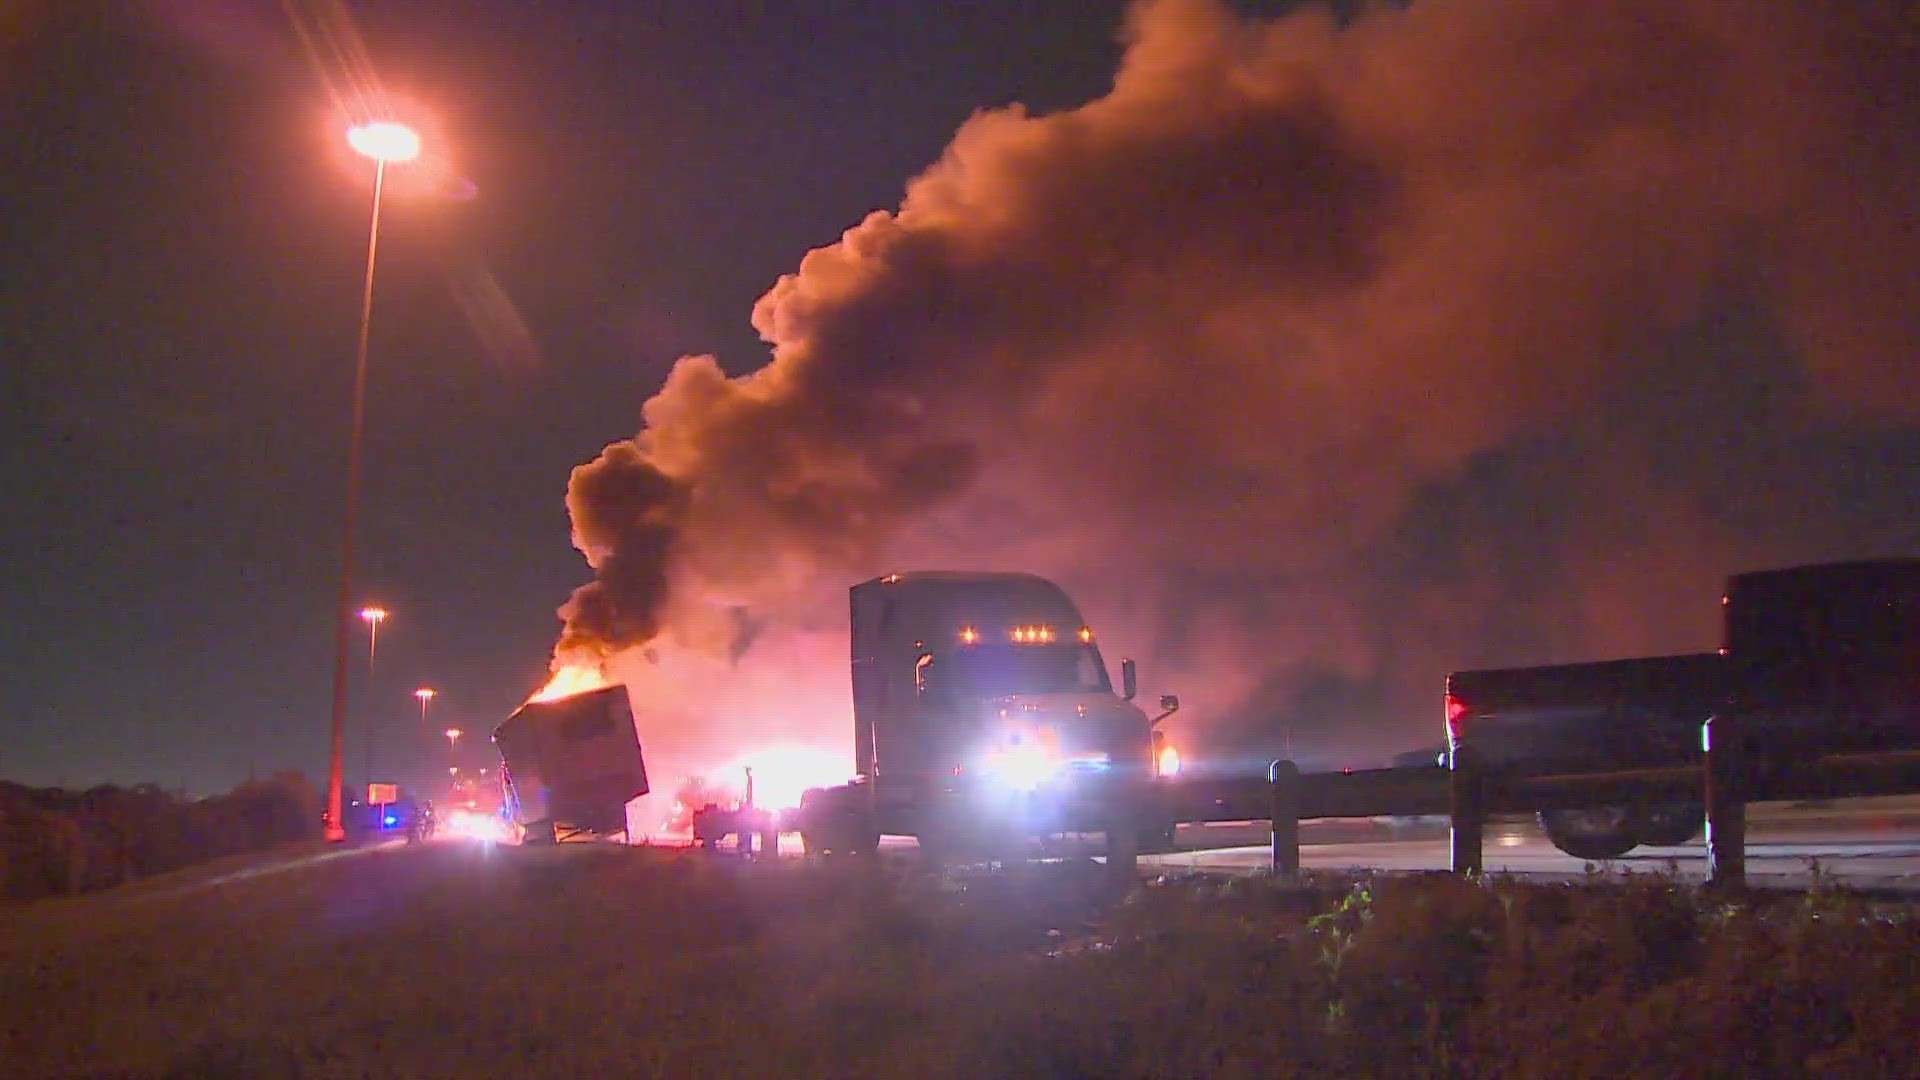 The fire happened on I-30 westbound by Loop 12. Officials tell WFAA the truck was carrying 42,000 pounds of frozen chicken.